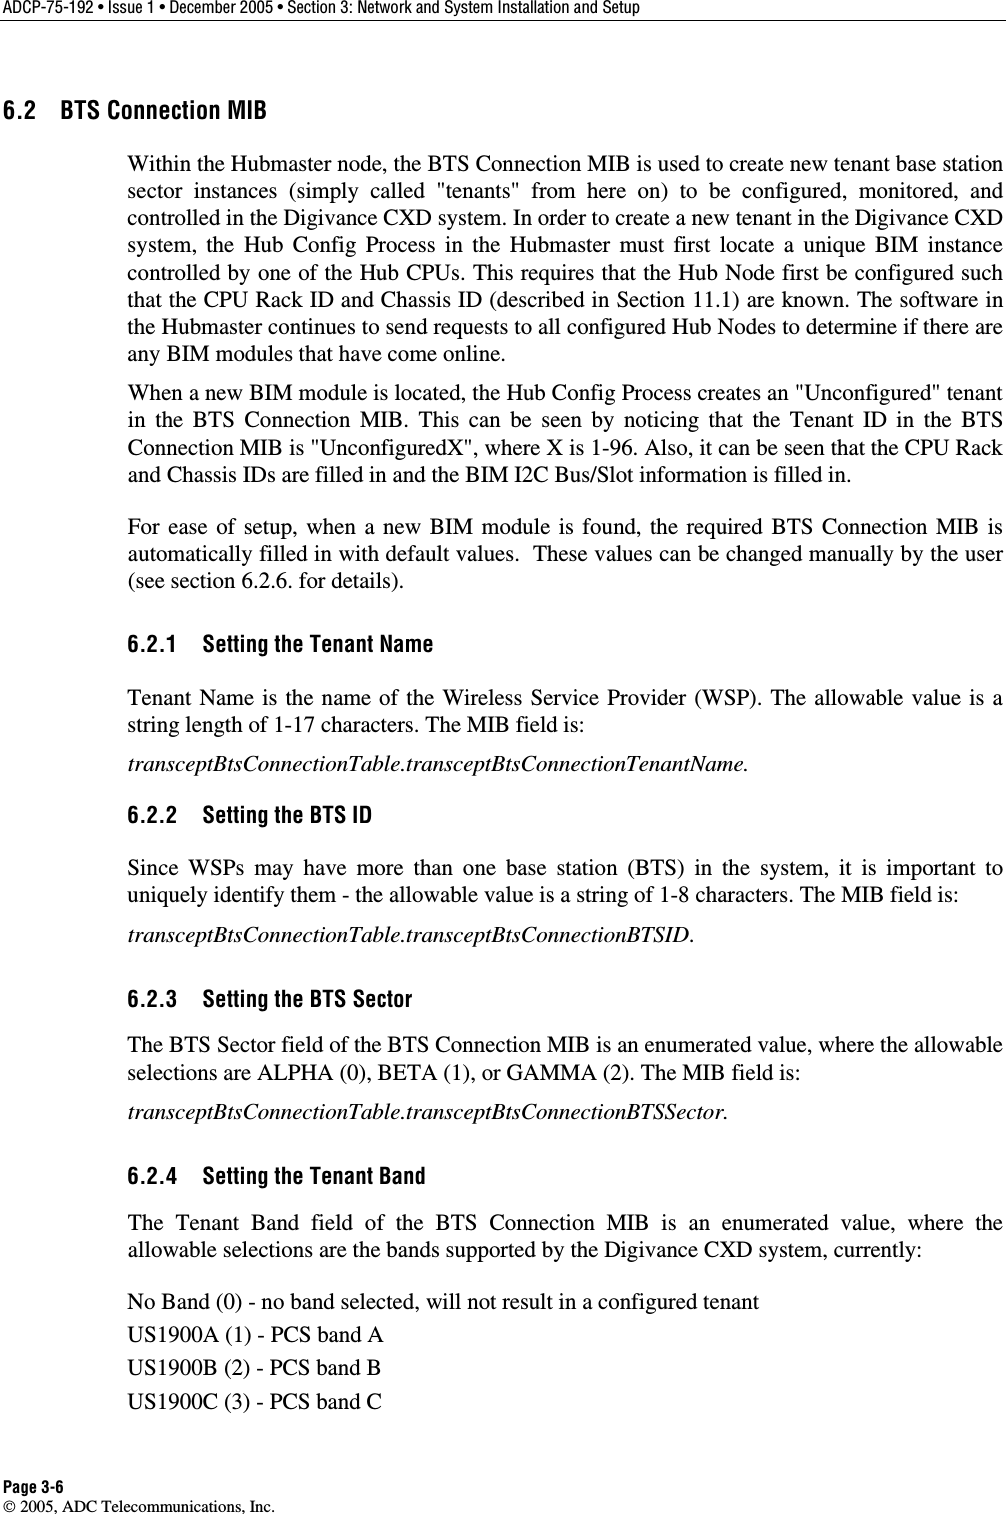 ADCP-75-192 • Issue 1 • December 2005 • Section 3: Network and System Installation and Setup Page 3-6  2005, ADC Telecommunications, Inc. 6.2  BTS Connection MIB Within the Hubmaster node, the BTS Connection MIB is used to create new tenant base station sector instances (simply called &quot;tenants&quot; from here on) to be configured, monitored, and controlled in the Digivance CXD system. In order to create a new tenant in the Digivance CXD system, the Hub Config Process in the Hubmaster must first locate a unique BIM instance controlled by one of the Hub CPUs. This requires that the Hub Node first be configured such that the CPU Rack ID and Chassis ID (described in Section 11.1) are known. The software in the Hubmaster continues to send requests to all configured Hub Nodes to determine if there are any BIM modules that have come online.  When a new BIM module is located, the Hub Config Process creates an &quot;Unconfigured&quot; tenant in the BTS Connection MIB. This can be seen by noticing that the Tenant ID in the BTS Connection MIB is &quot;UnconfiguredX&quot;, where X is 1-96. Also, it can be seen that the CPU Rack and Chassis IDs are filled in and the BIM I2C Bus/Slot information is filled in. For ease of setup, when a new BIM module is found, the required BTS Connection MIB is automatically filled in with default values.  These values can be changed manually by the user (see section 6.2.6. for details). 6.2.1  Setting the Tenant Name Tenant Name is the name of the Wireless Service Provider (WSP). The allowable value is a string length of 1-17 characters. The MIB field is:  transceptBtsConnectionTable.transceptBtsConnectionTenantName. 6.2.2  Setting the BTS ID  Since WSPs may have more than one base station (BTS) in the system, it is important to uniquely identify them - the allowable value is a string of 1-8 characters. The MIB field is:  transceptBtsConnectionTable.transceptBtsConnectionBTSID. 6.2.3  Setting the BTS Sector The BTS Sector field of the BTS Connection MIB is an enumerated value, where the allowable selections are ALPHA (0), BETA (1), or GAMMA (2). The MIB field is:  transceptBtsConnectionTable.transceptBtsConnectionBTSSector. 6.2.4  Setting the Tenant Band The Tenant Band field of the BTS Connection MIB is an enumerated value, where the allowable selections are the bands supported by the Digivance CXD system, currently:  No Band (0) - no band selected, will not result in a configured tenant US1900A (1) - PCS band A US1900B (2) - PCS band B US1900C (3) - PCS band C 